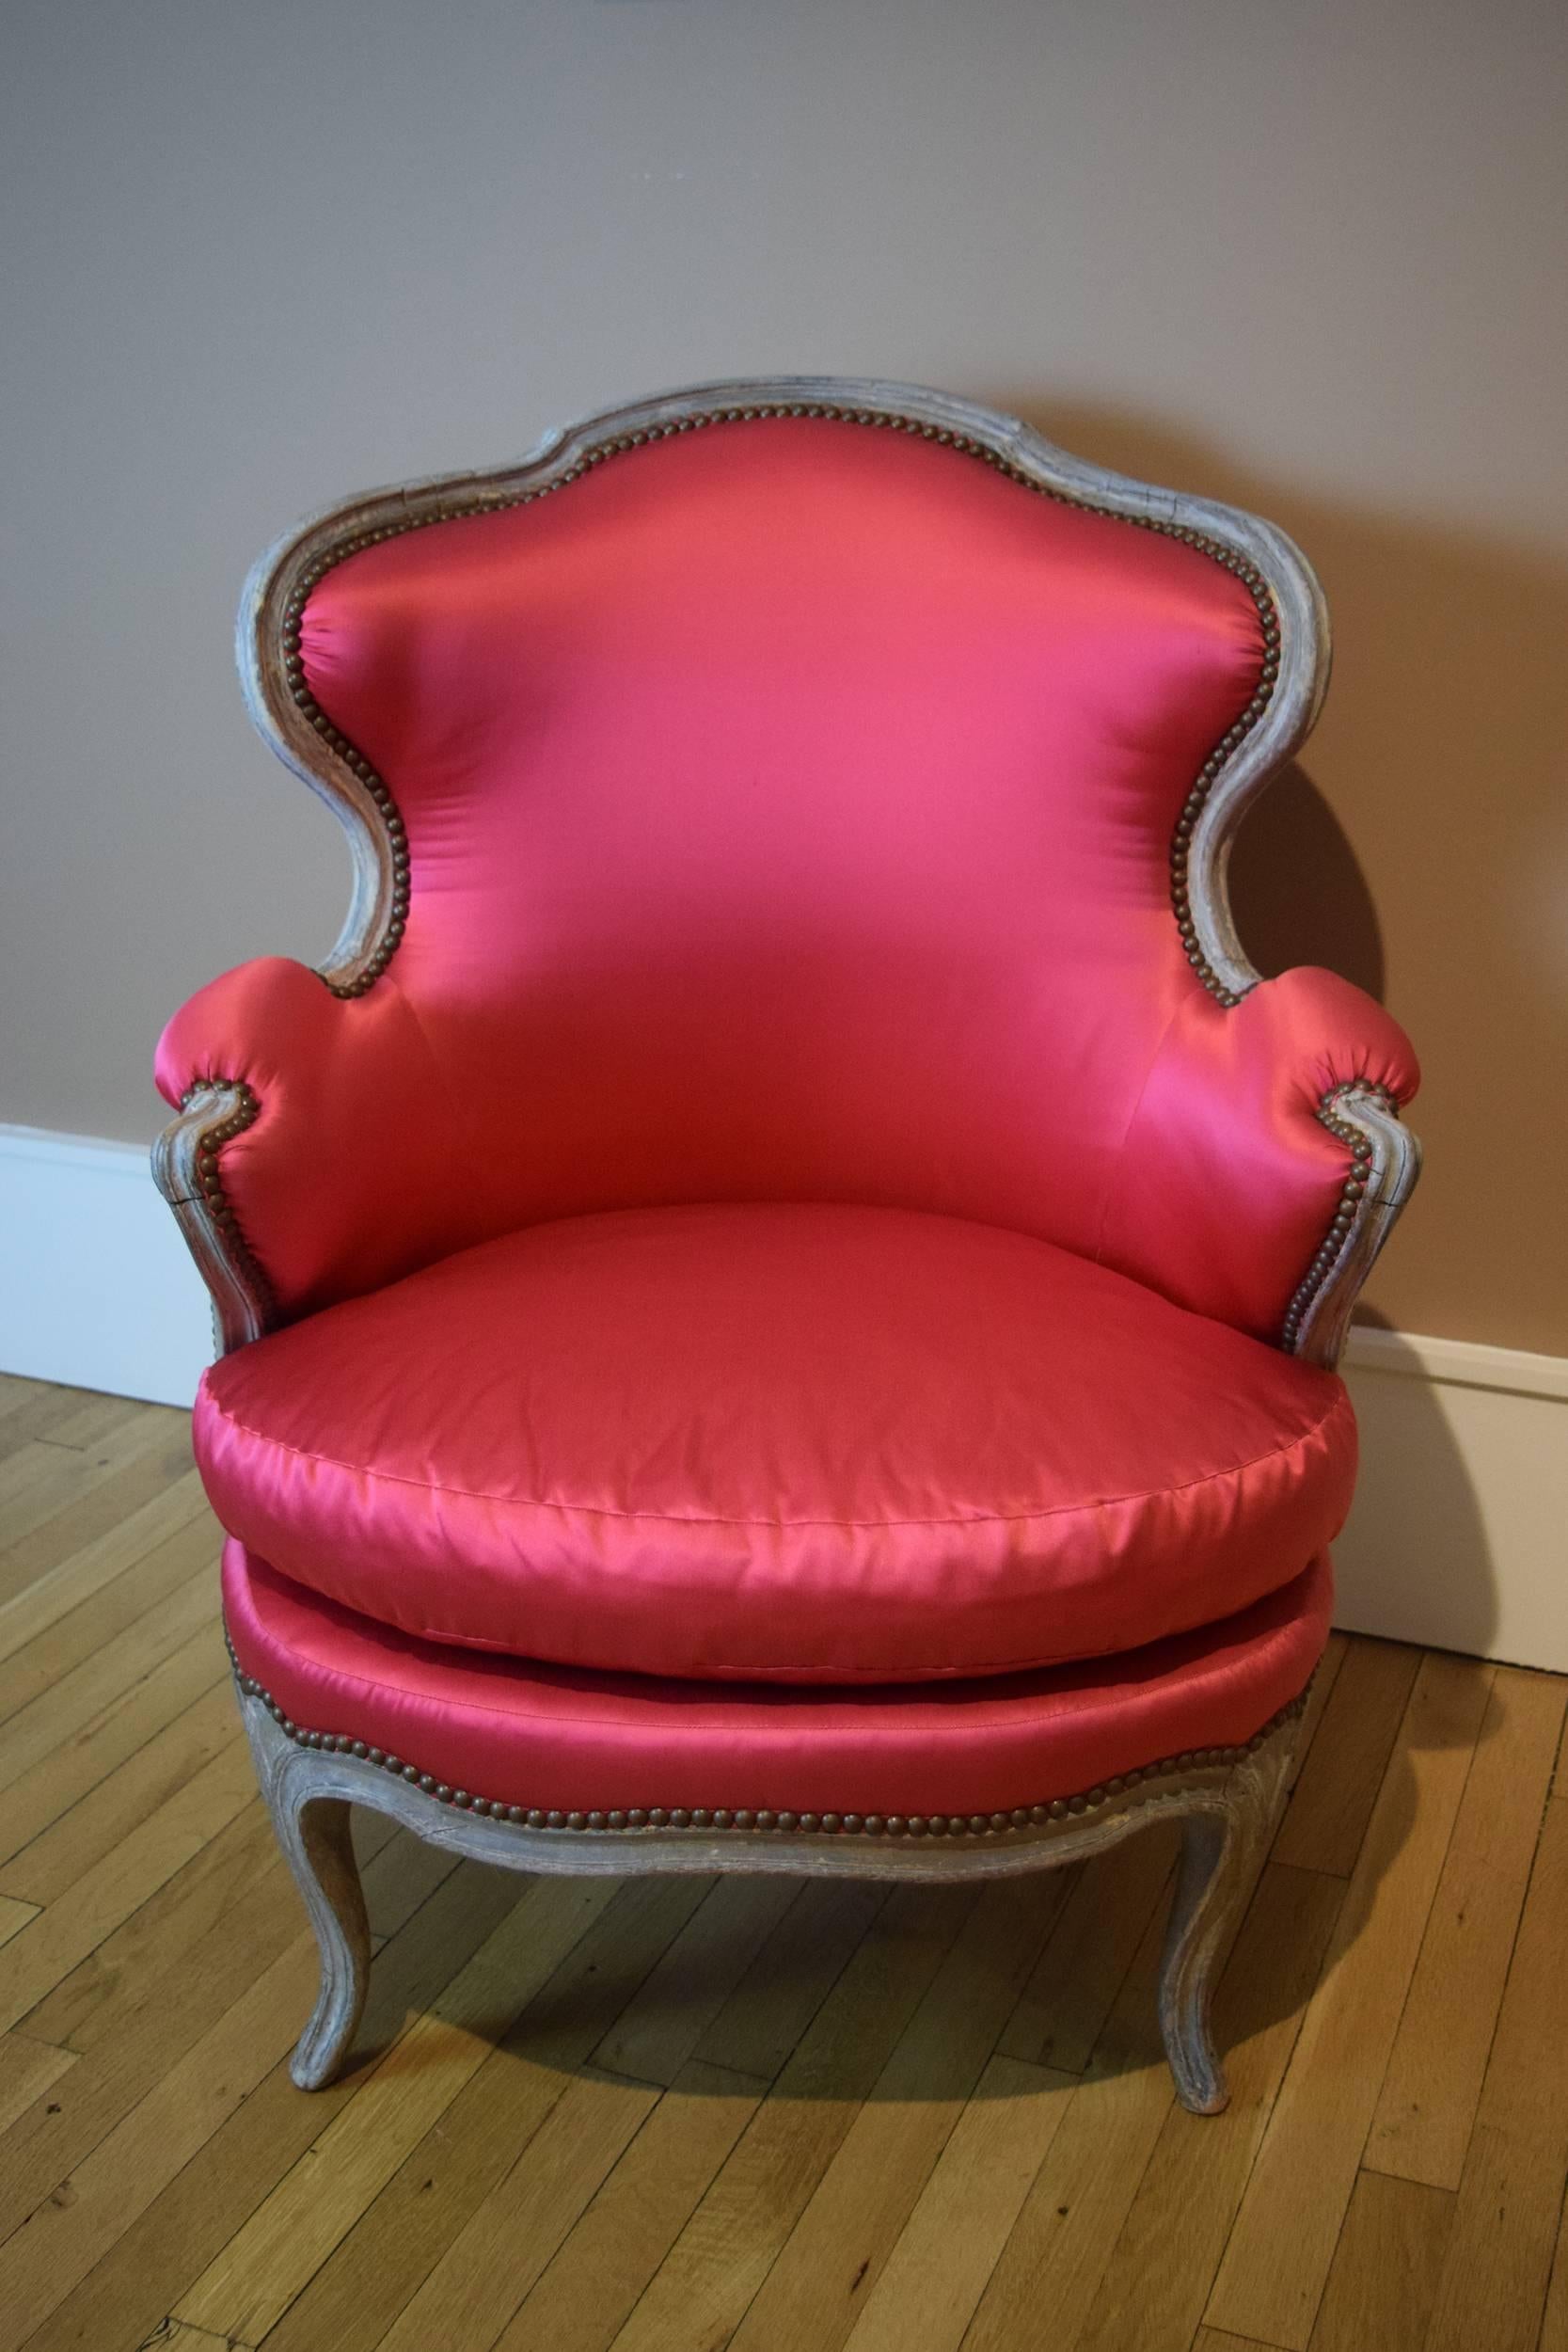 This fine 18th century armchair belonged to Elsa Schiaparelli, the fashion designer who was celebrated for her surrealist creations, and patronage of Salvador Dali and Jean Cocteau. The new silk-satin upholstery is in her signature color Shocking